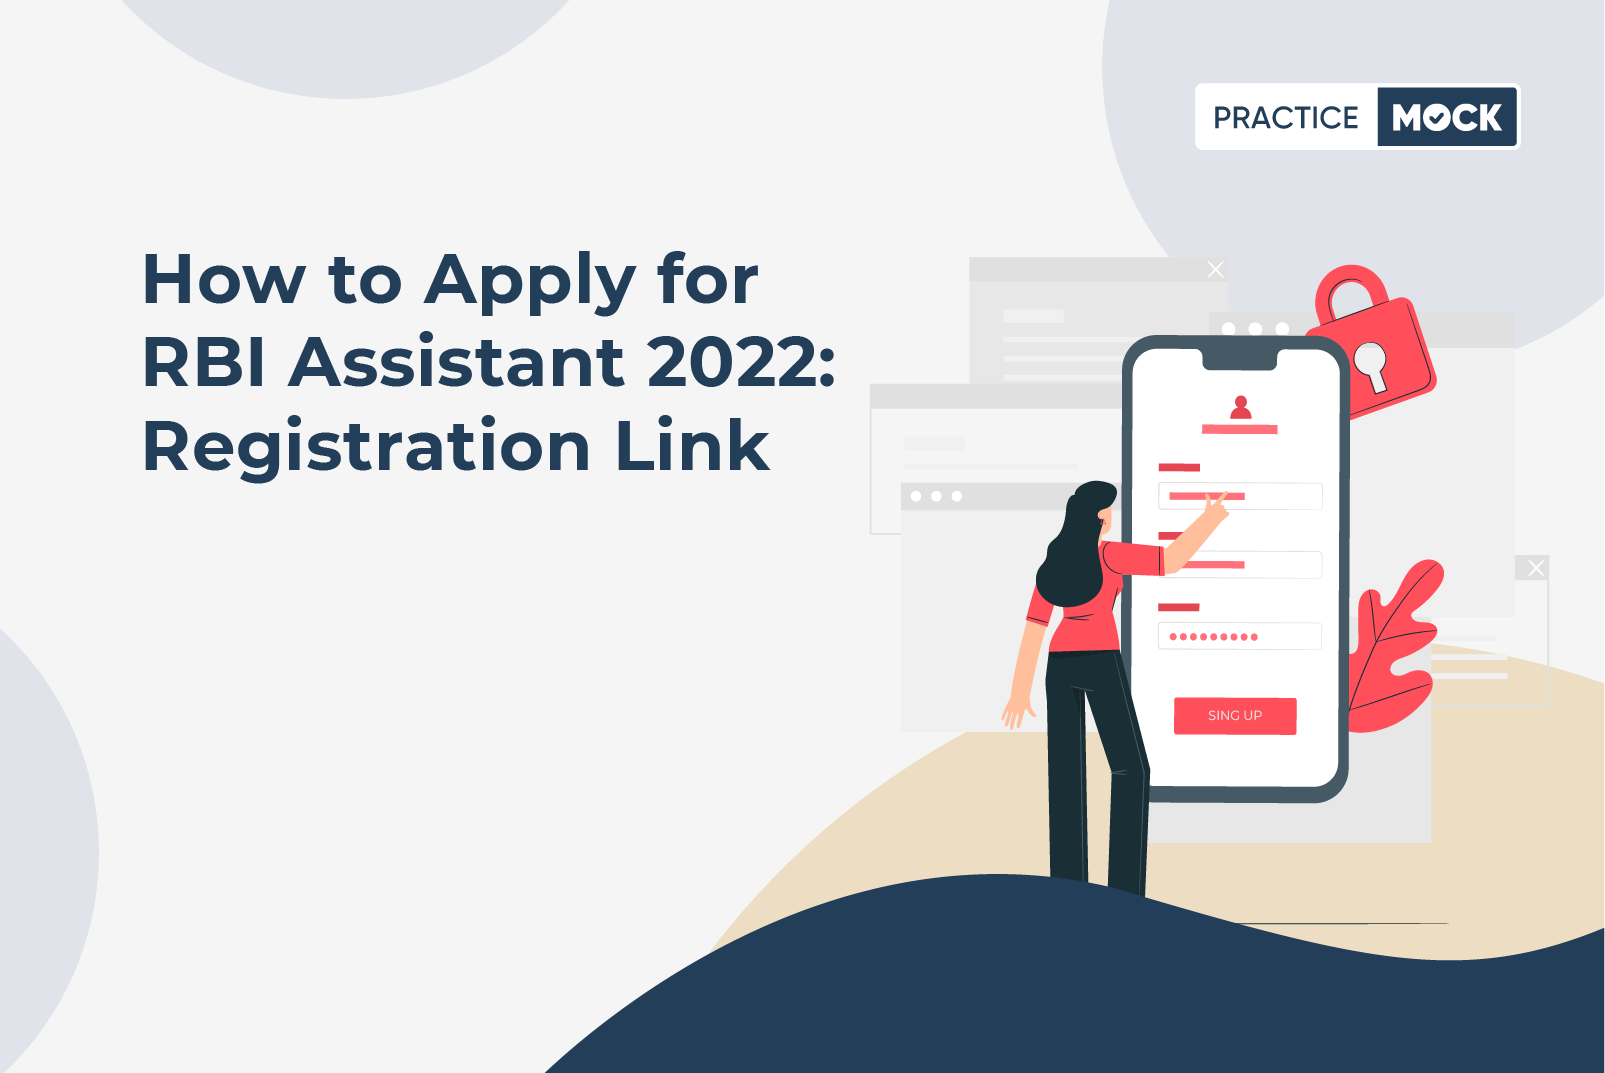 How to apply for RBI Assistant 2022